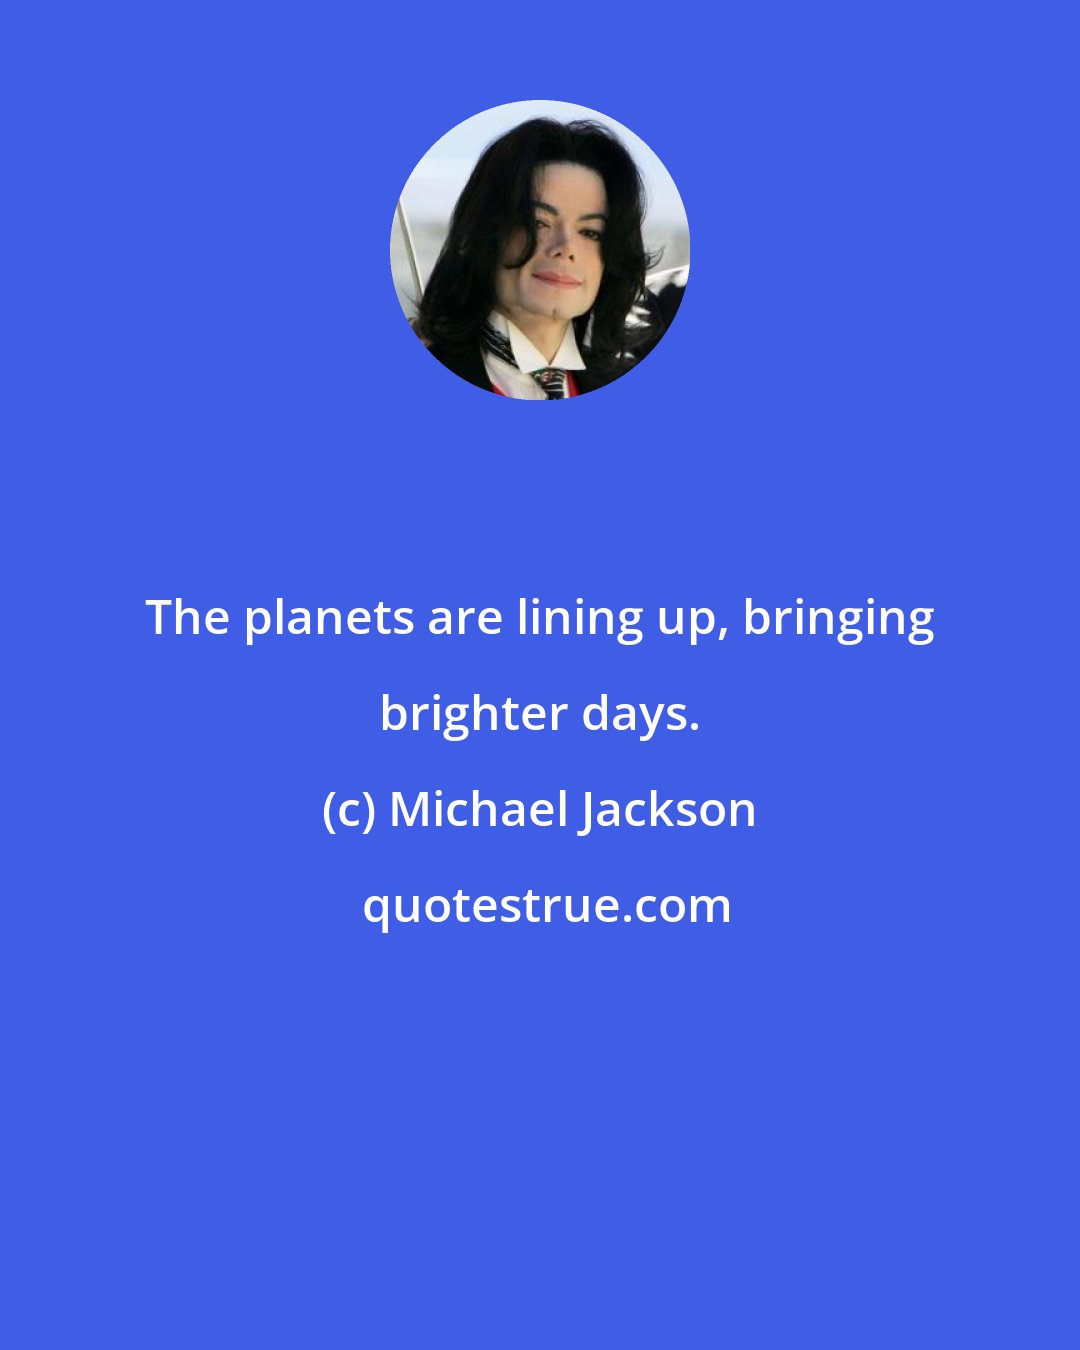 Michael Jackson: The planets are lining up, bringing brighter days.